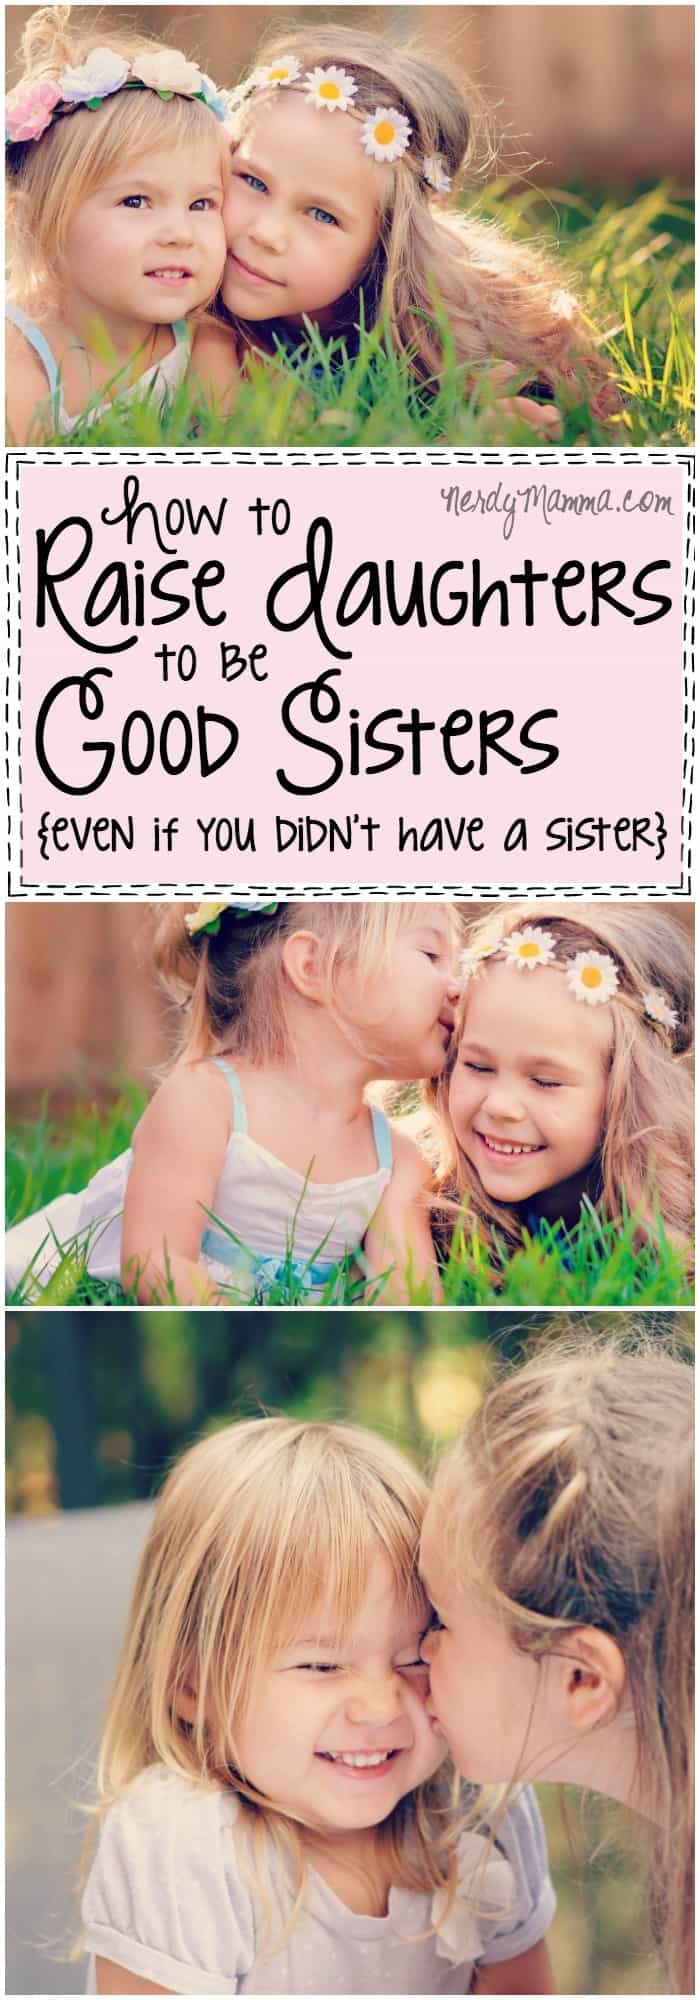 I love this parenting advice on how to raise daughters to be good sisters. I mean--I guess I've been over thinking it.